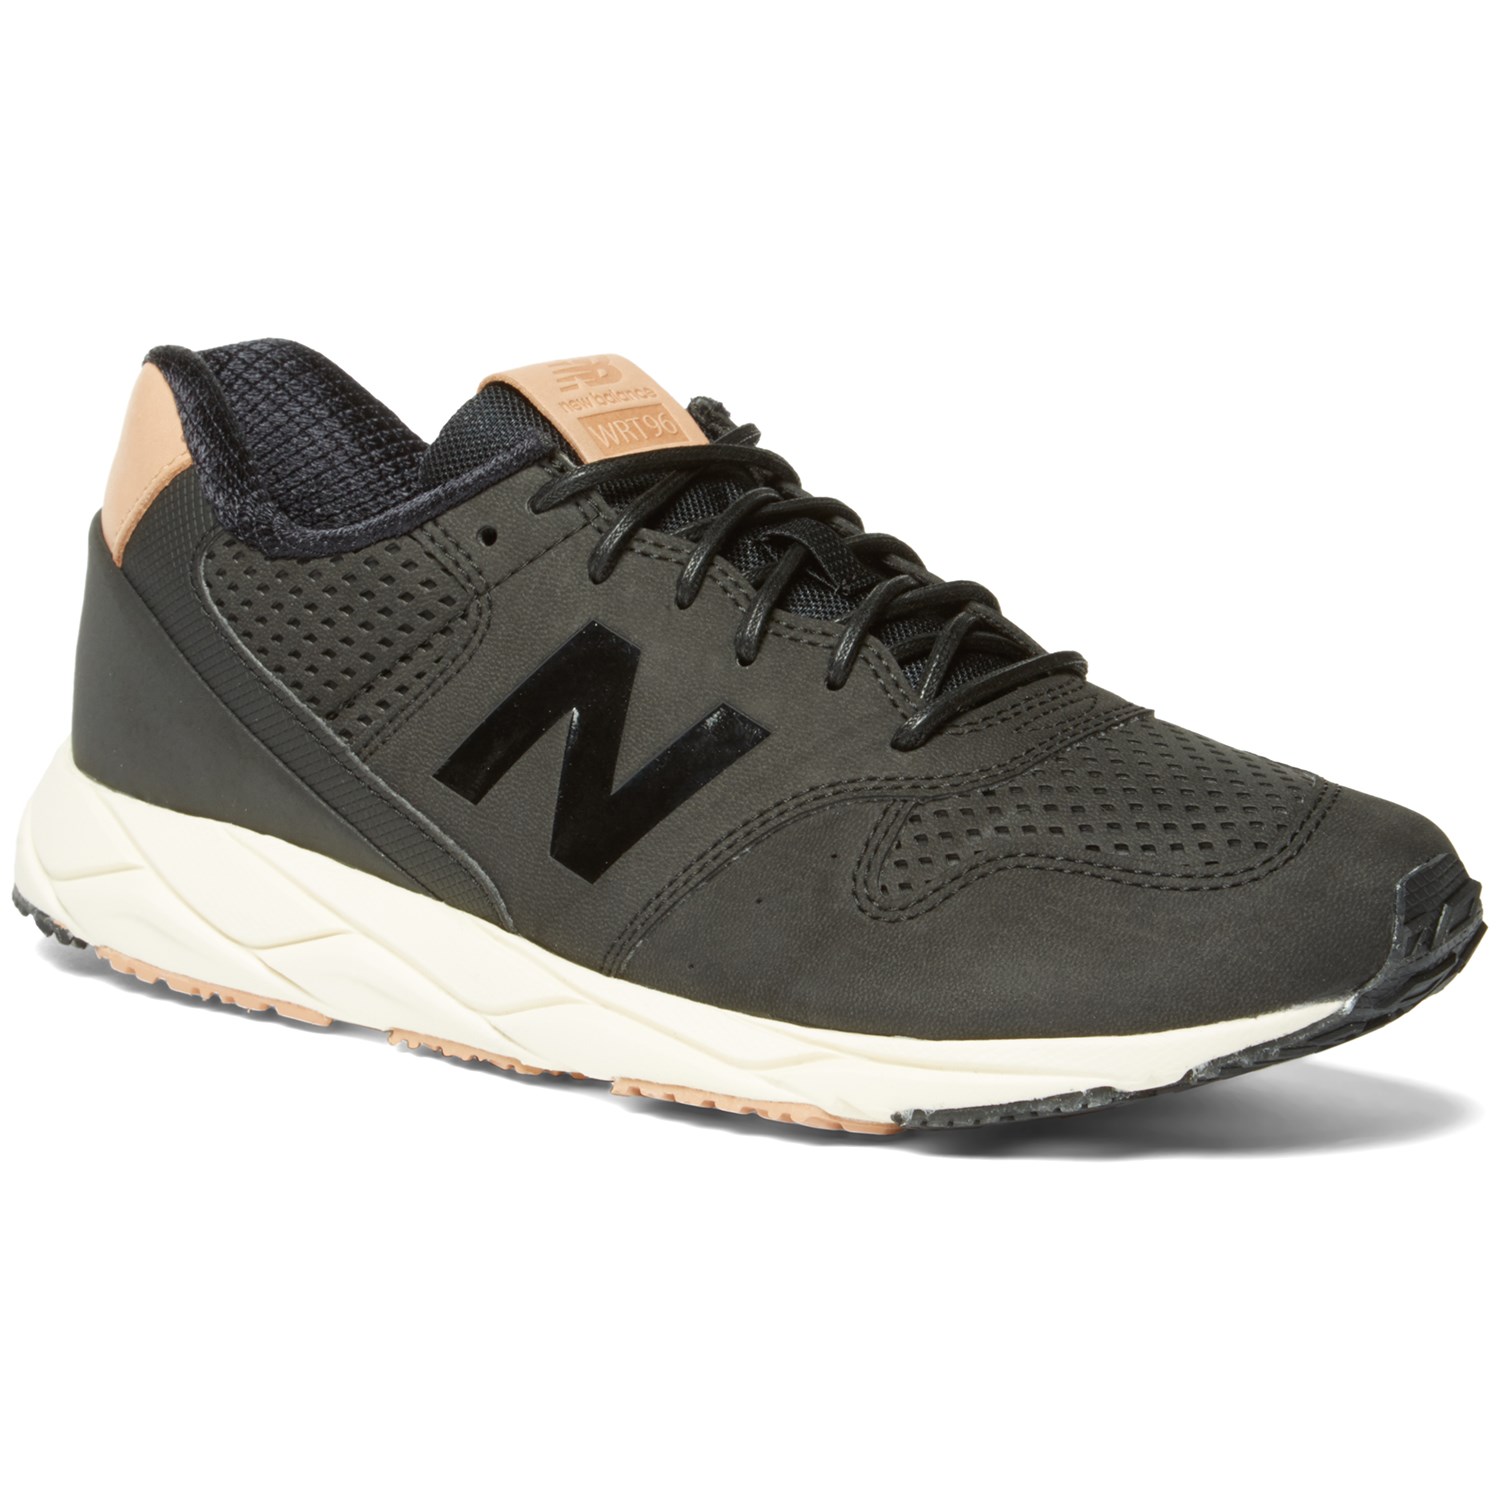 Medicinal sequence excitation New Balance 96 Mash-Up Shoes - Women's | evo